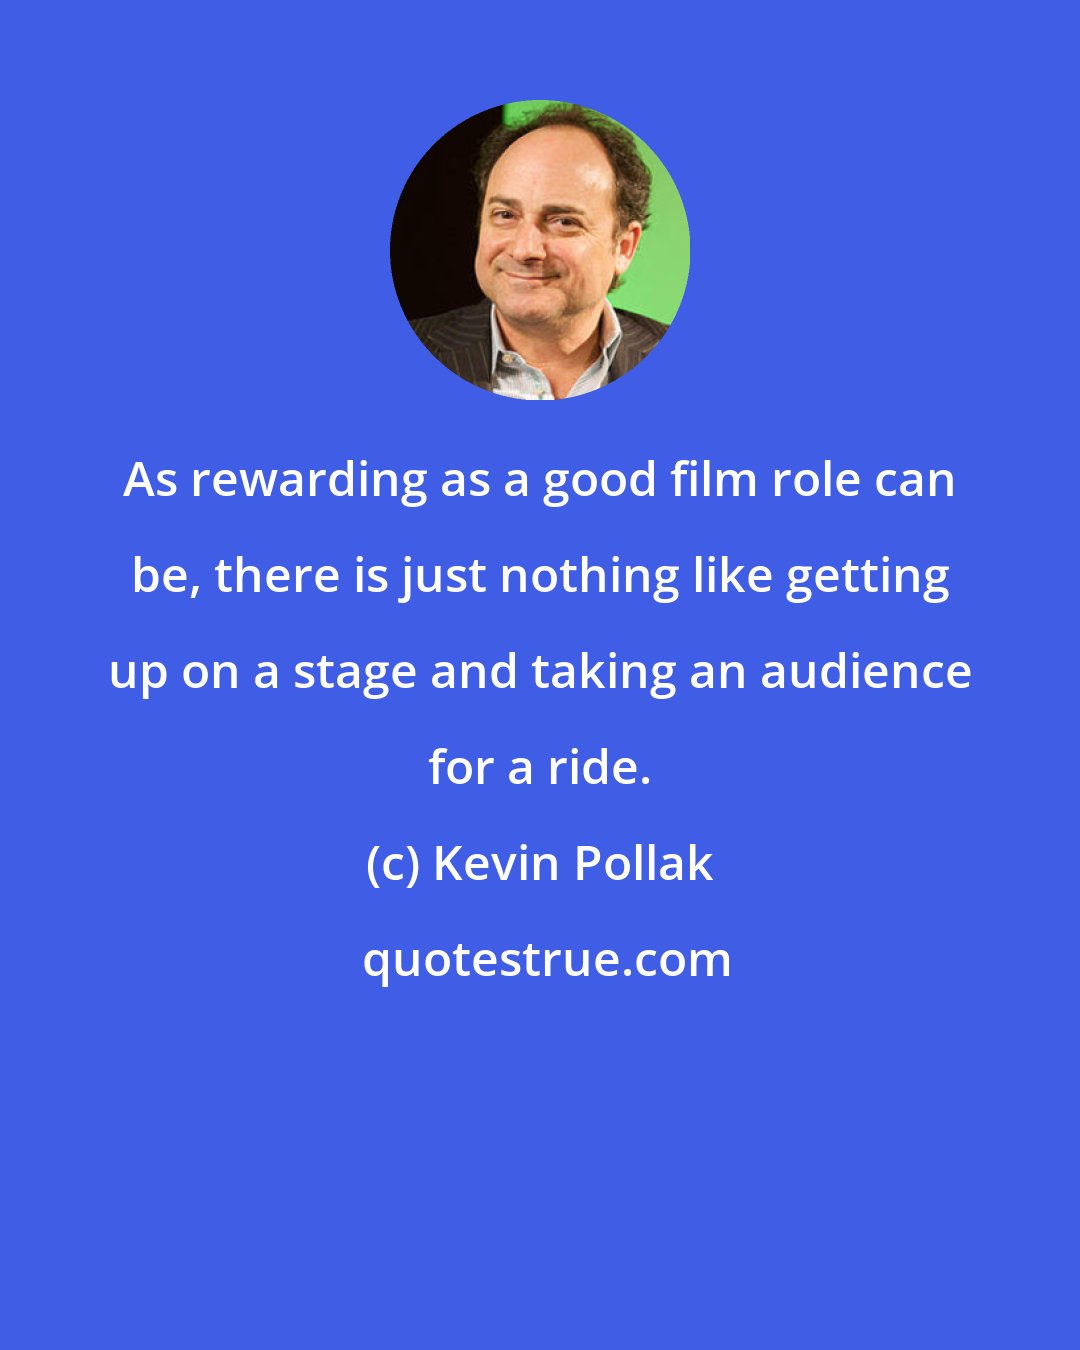 Kevin Pollak: As rewarding as a good film role can be, there is just nothing like getting up on a stage and taking an audience for a ride.